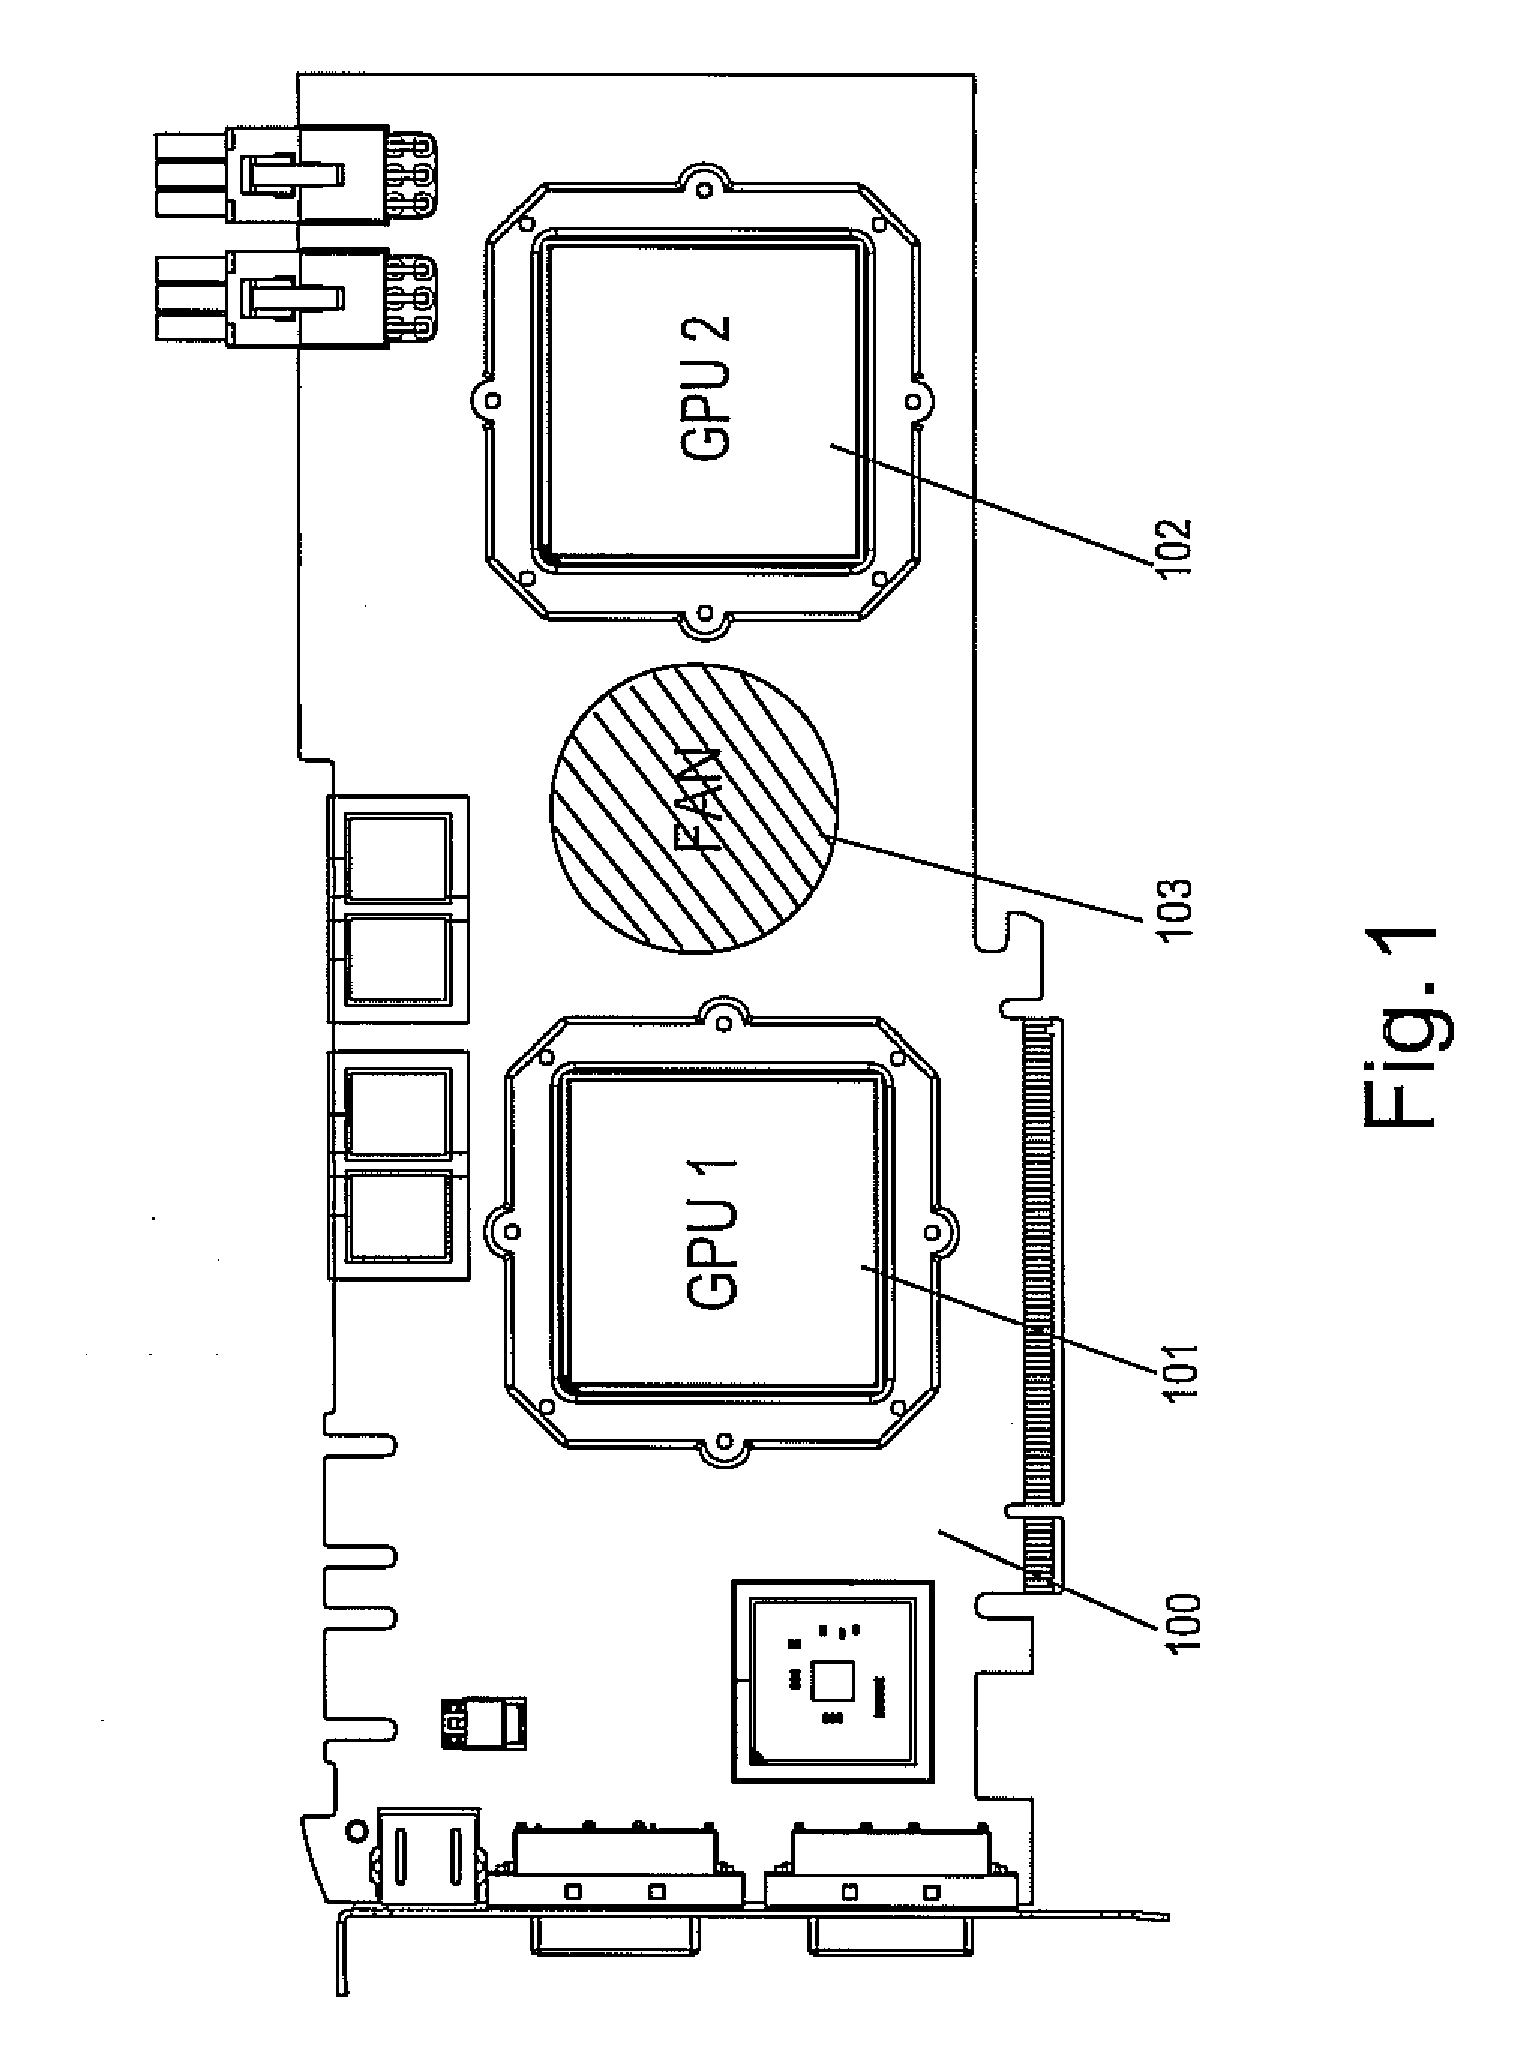 Circuit, system and method for controlling heat dissipation for multiple units on a circuit board